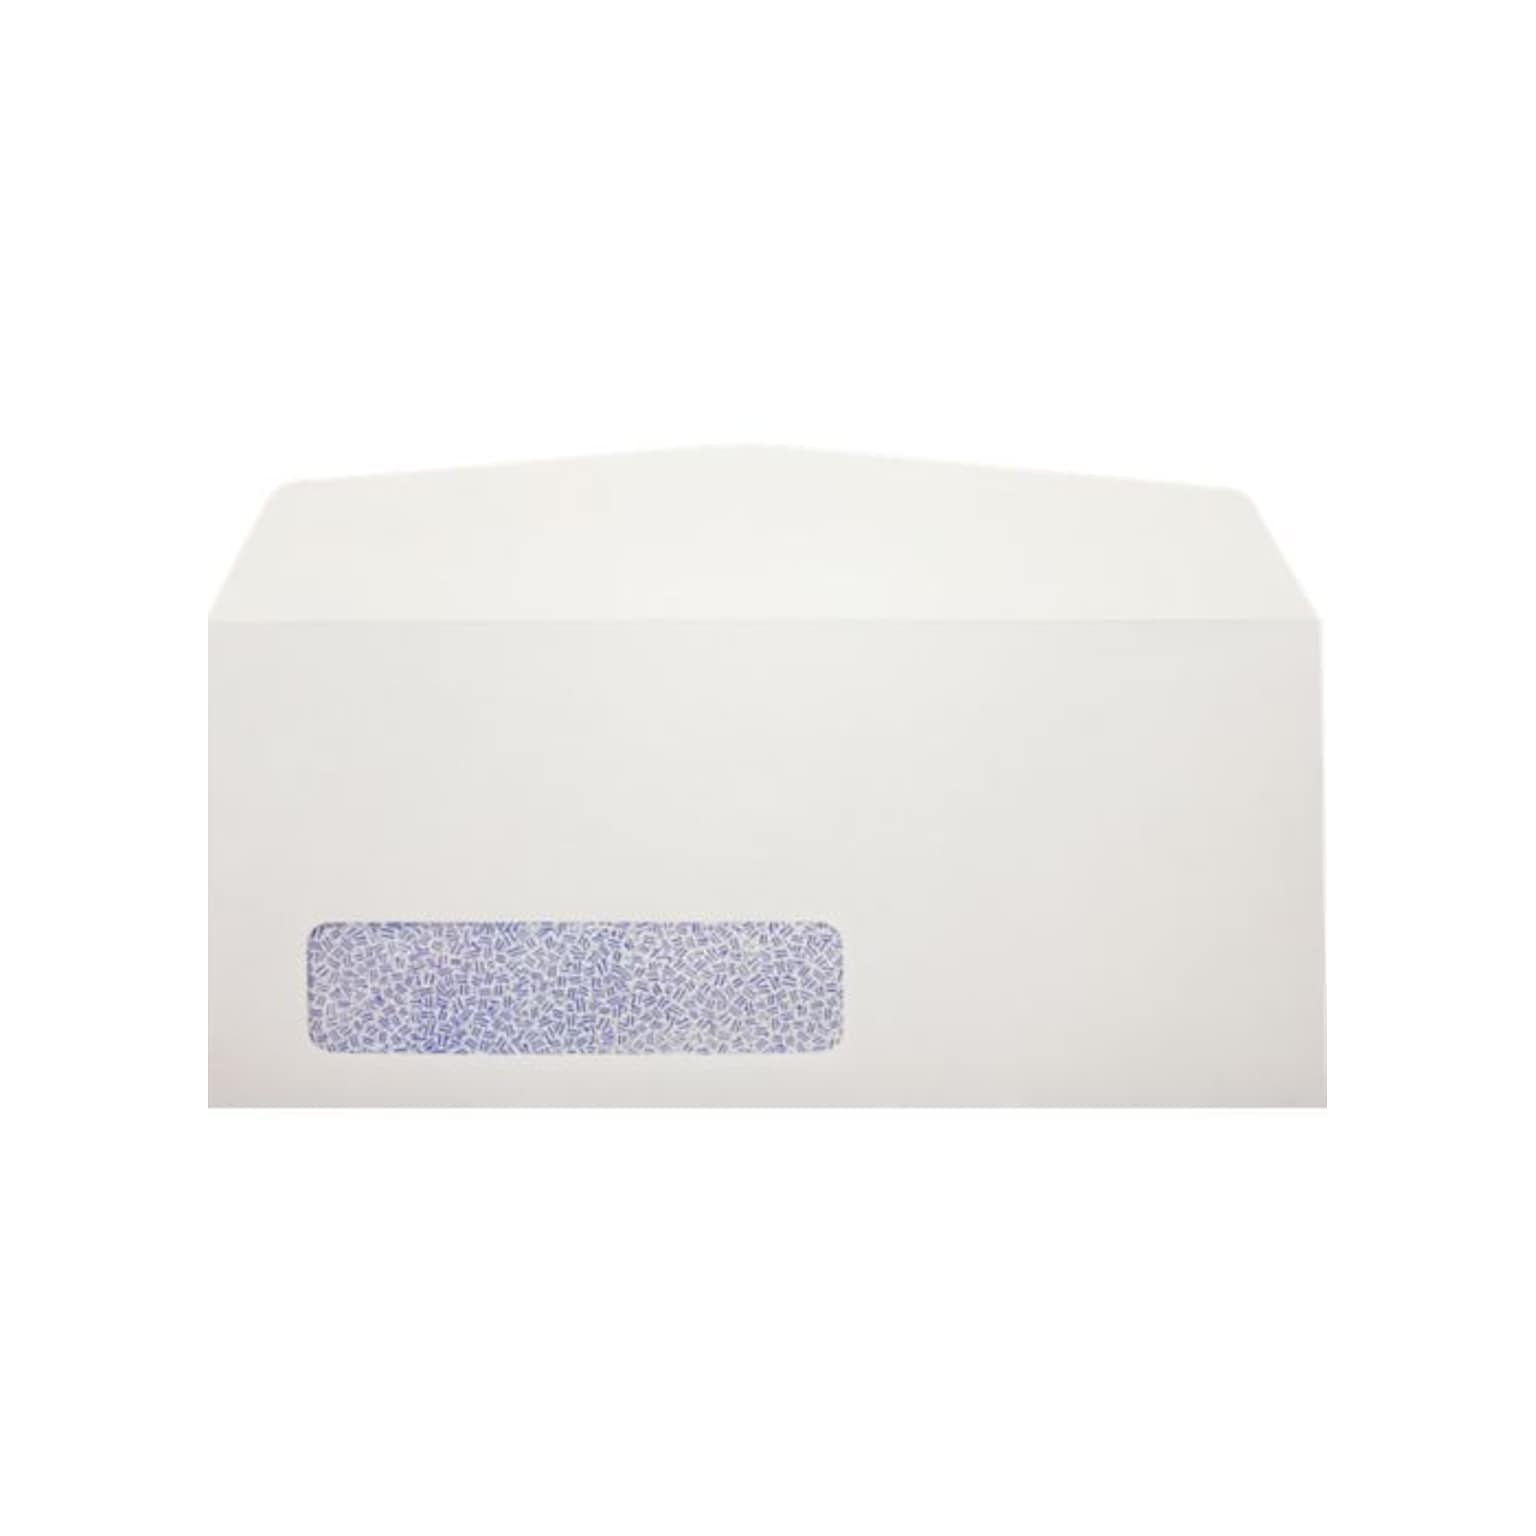 LUX #11 Window Envelopes (4 1/2 x 10 3/8) 500/Pack, 24lb. White w/ Security Tint (43675-ST-500)